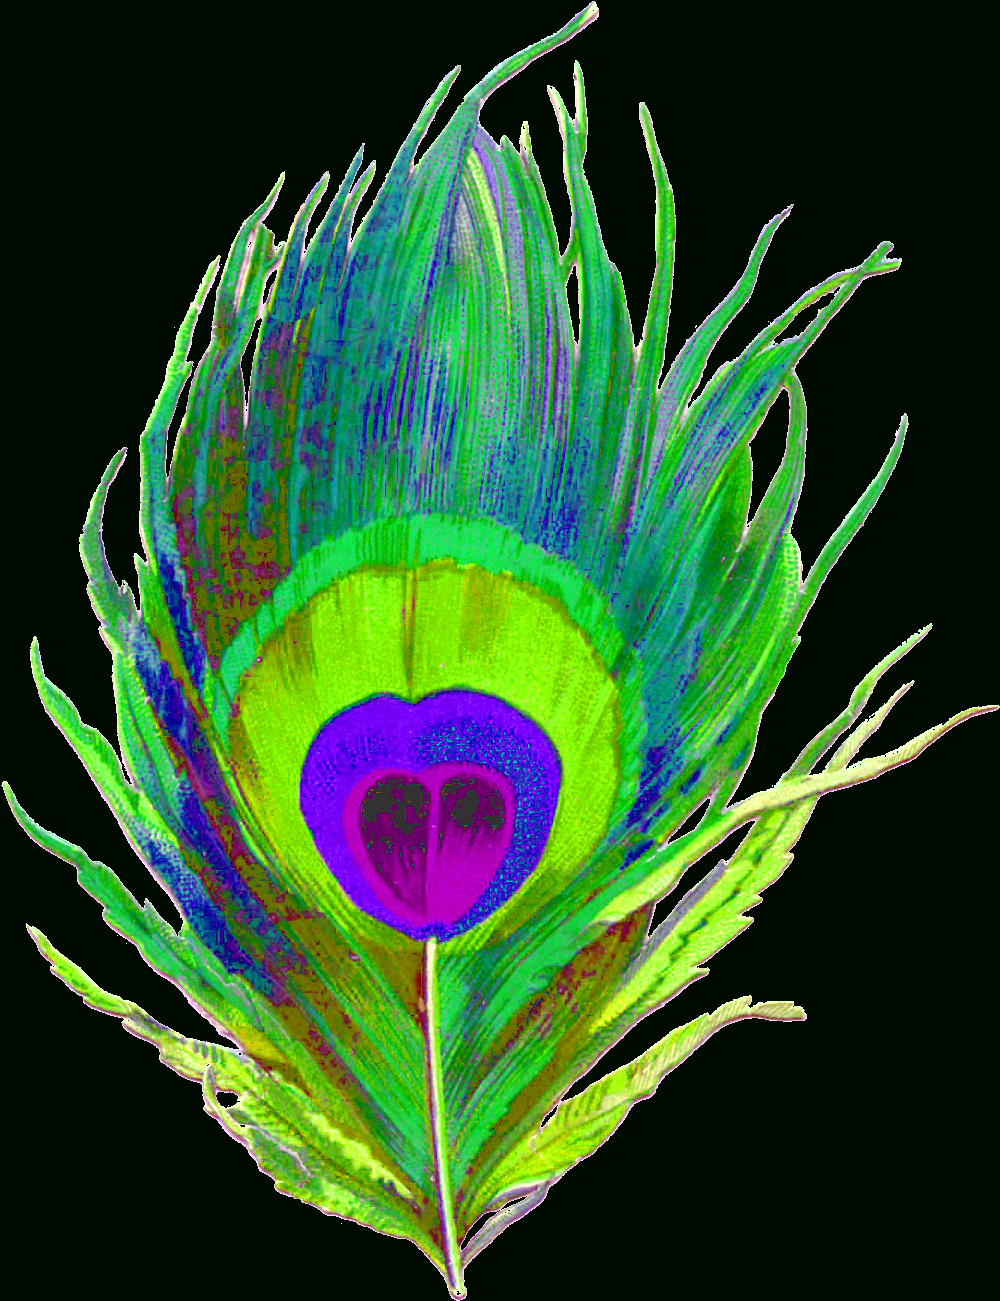 Single Peacock Feathers Clipart 10 Free Cliparts à Feather Clipart